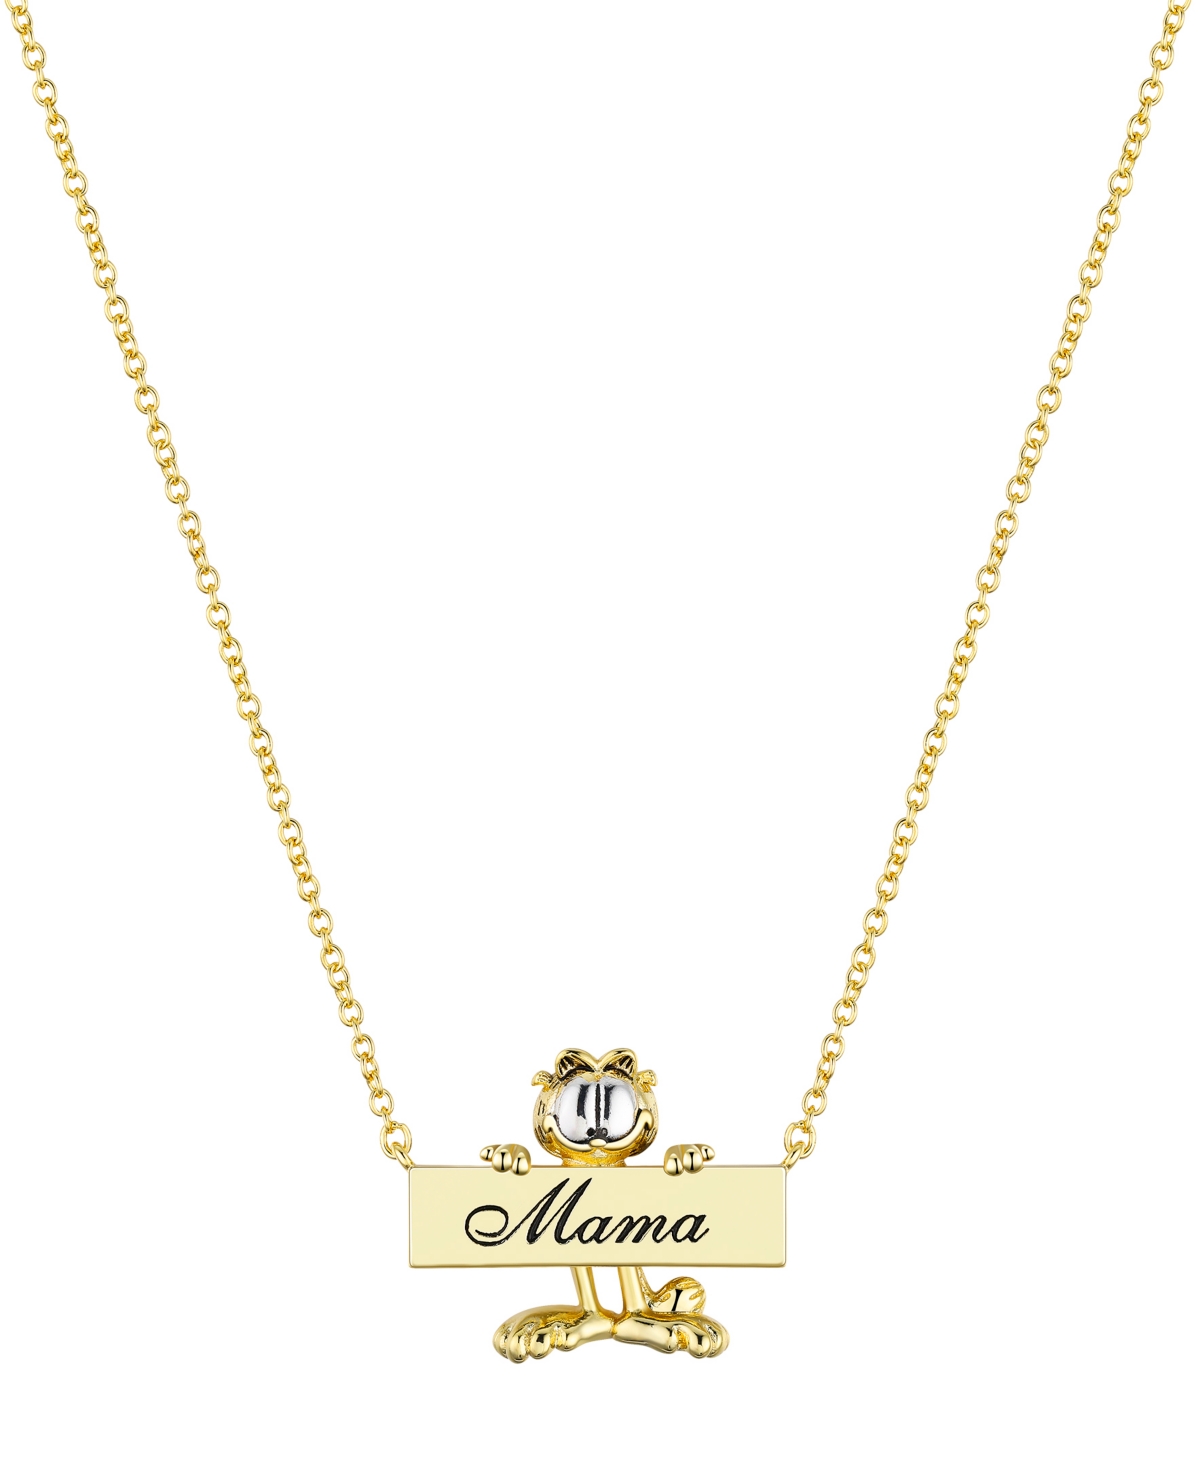 14K Gold Plated Garfield "Mama" Necklace - Gold